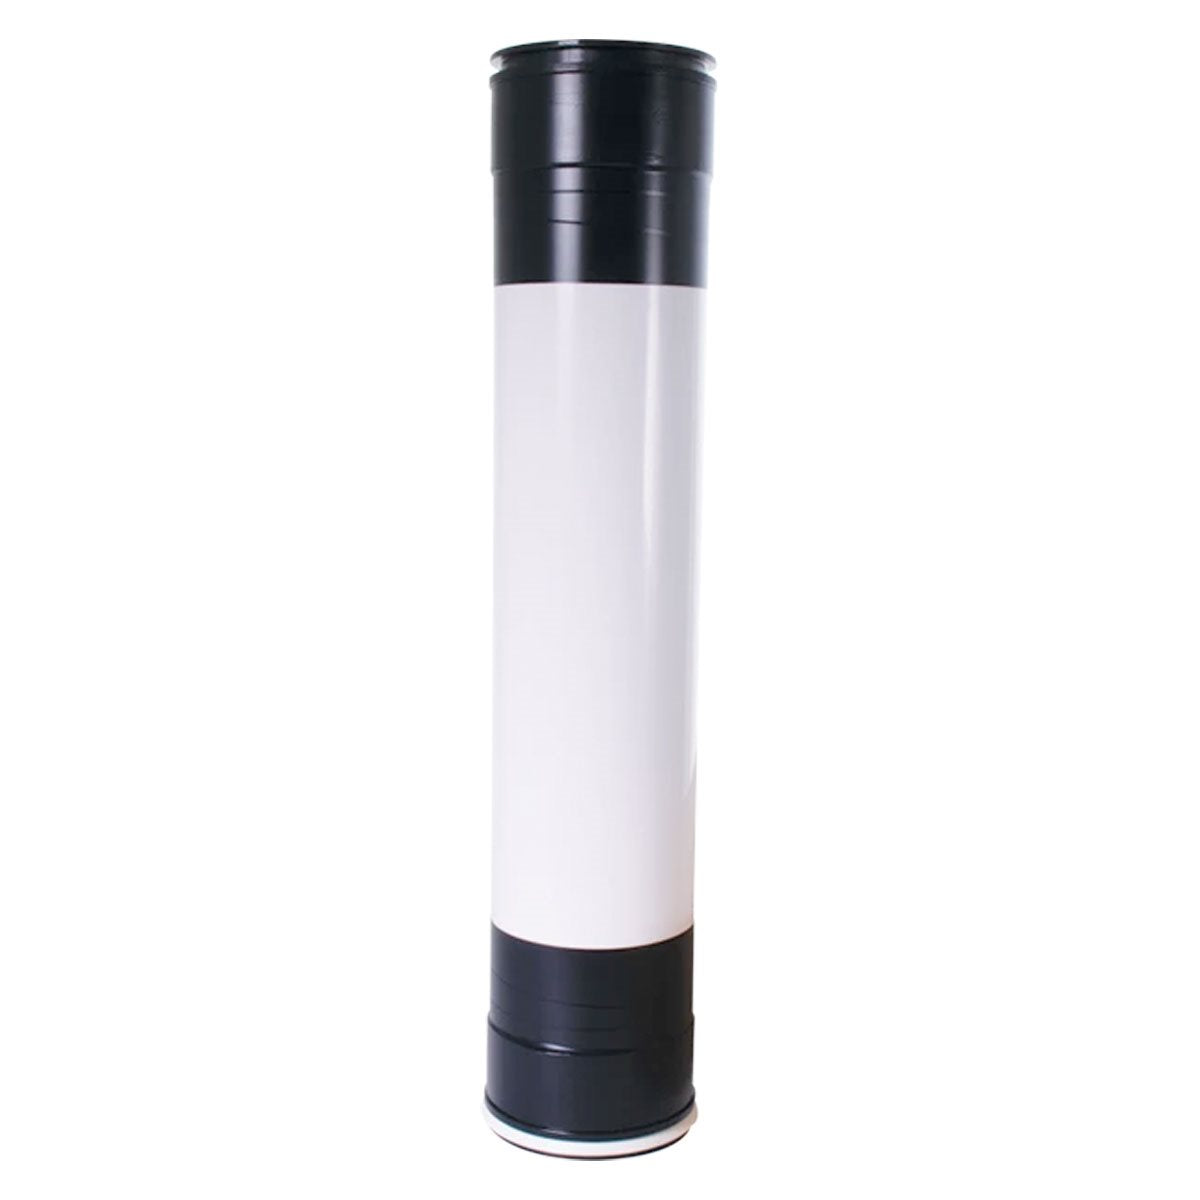 Product Image:Hydro-Logic HYDROID - Encapsolated Carbon Prefilter Replacement